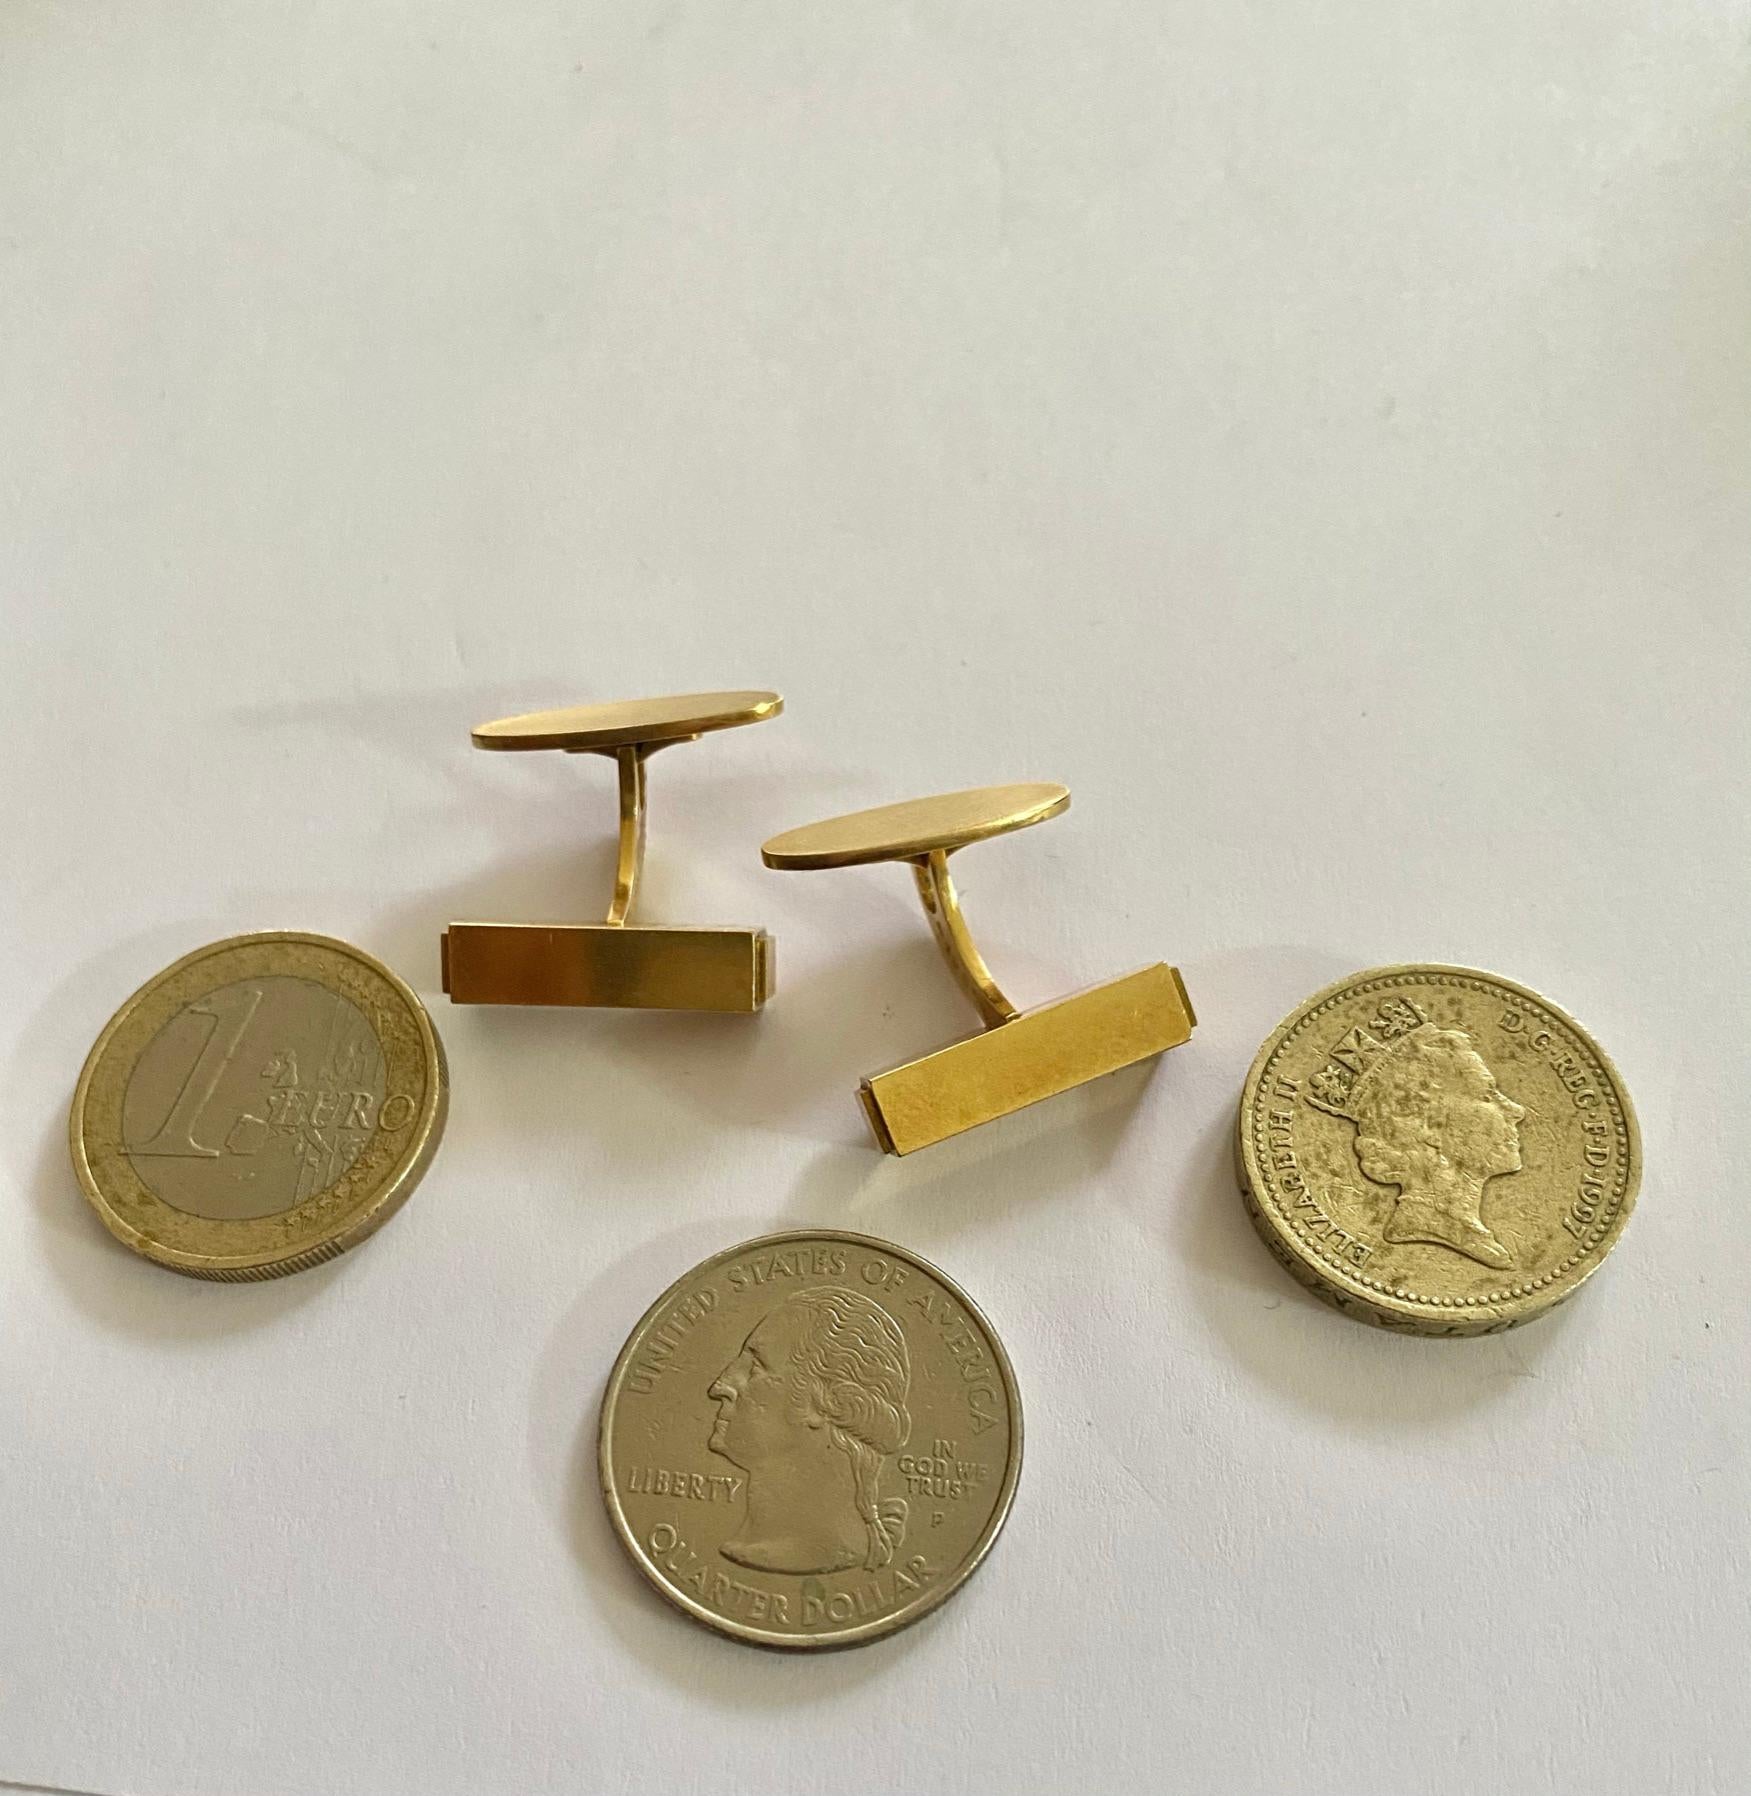 18K. yellow gold cufflinks, sleek modern model, Signed: GEORG JENSEN
No: 1095
Denmark ca 1970
dimensions: rod: 20 x 5 x 5 mm
Weight: 12.42 grams
This very wearable pair of cufflinks comes in an original box by Georg Jensen (new) and a certificate